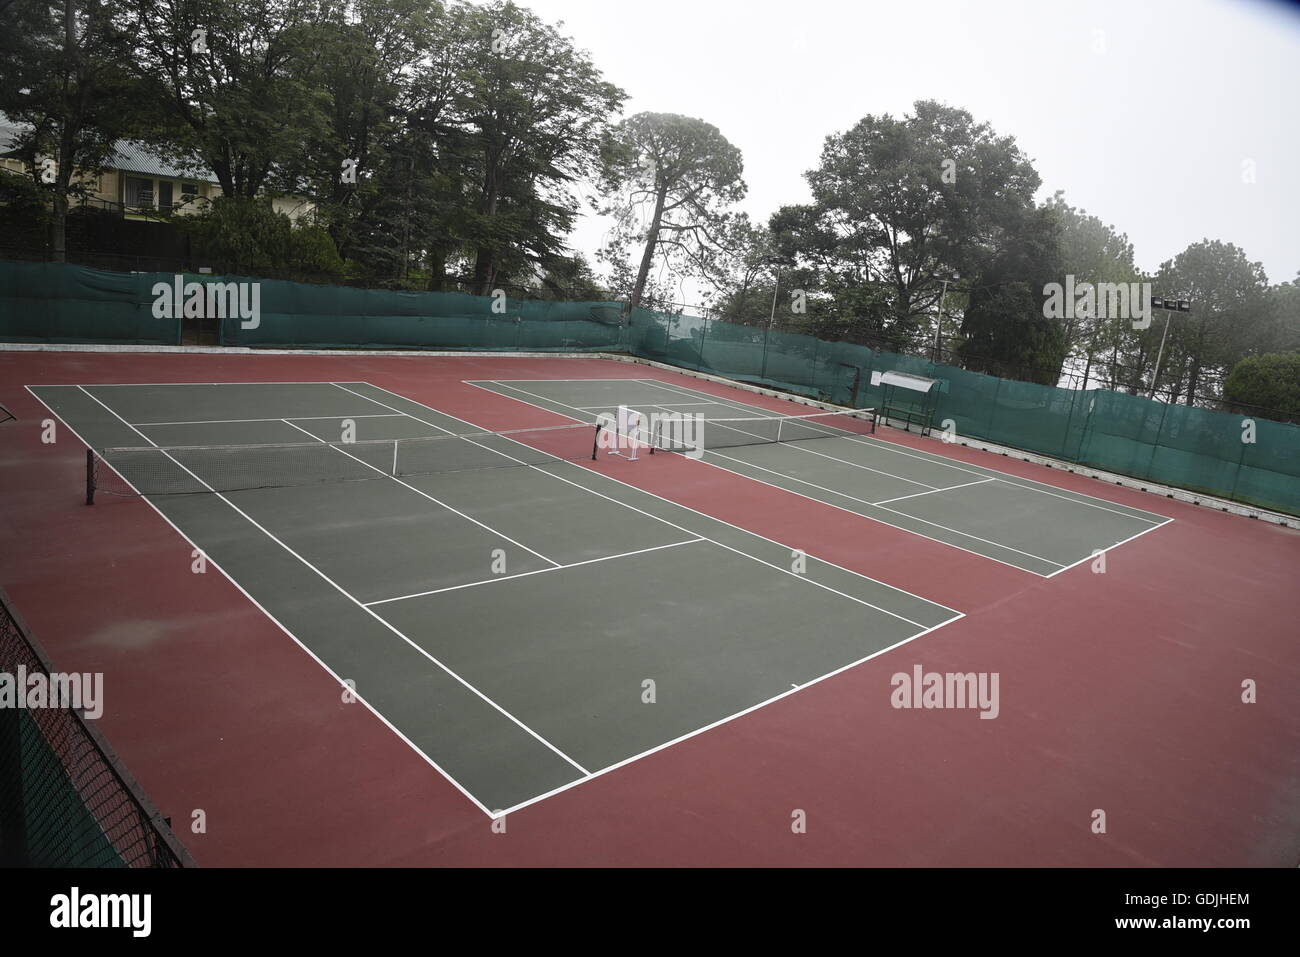 Empty Closed tennis court sport play ground locked all weather surfaced tennis courts, India, Asia Stock Photo